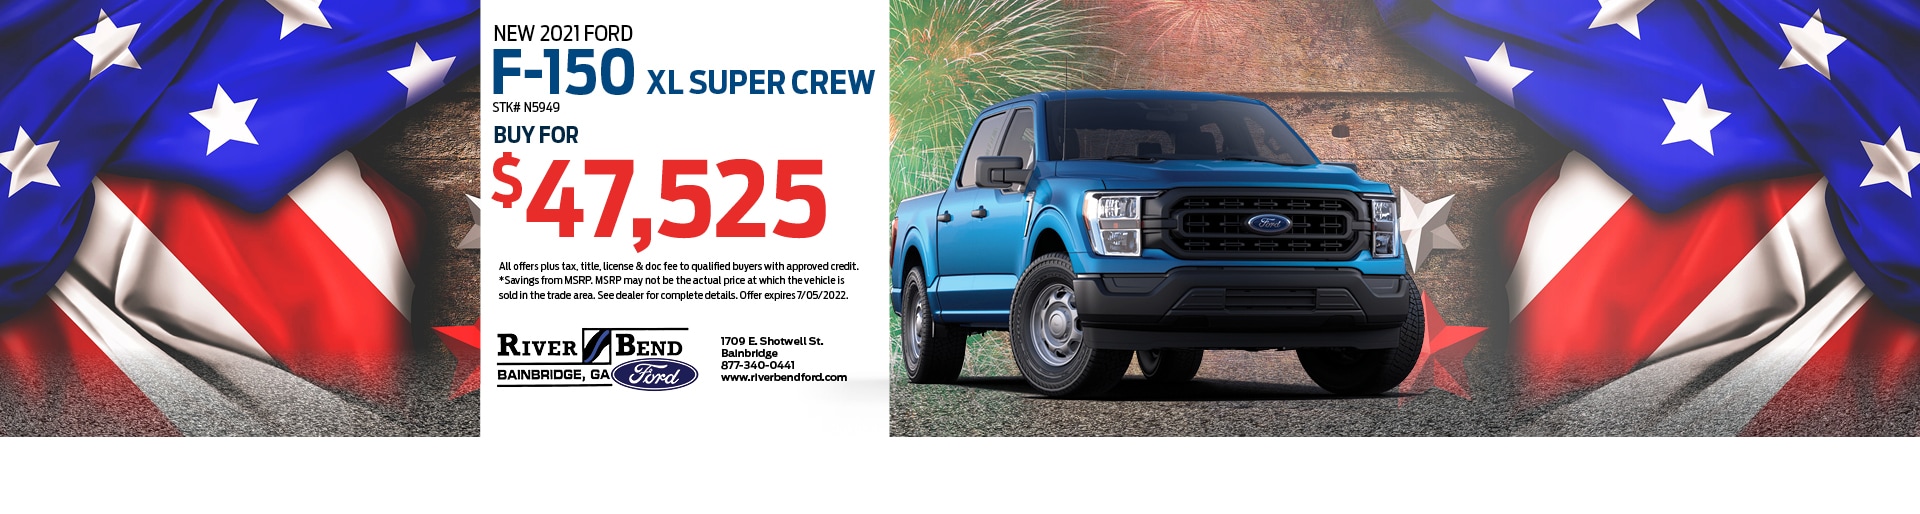 2021 Ford F-150 XL Super Crew for $47,525